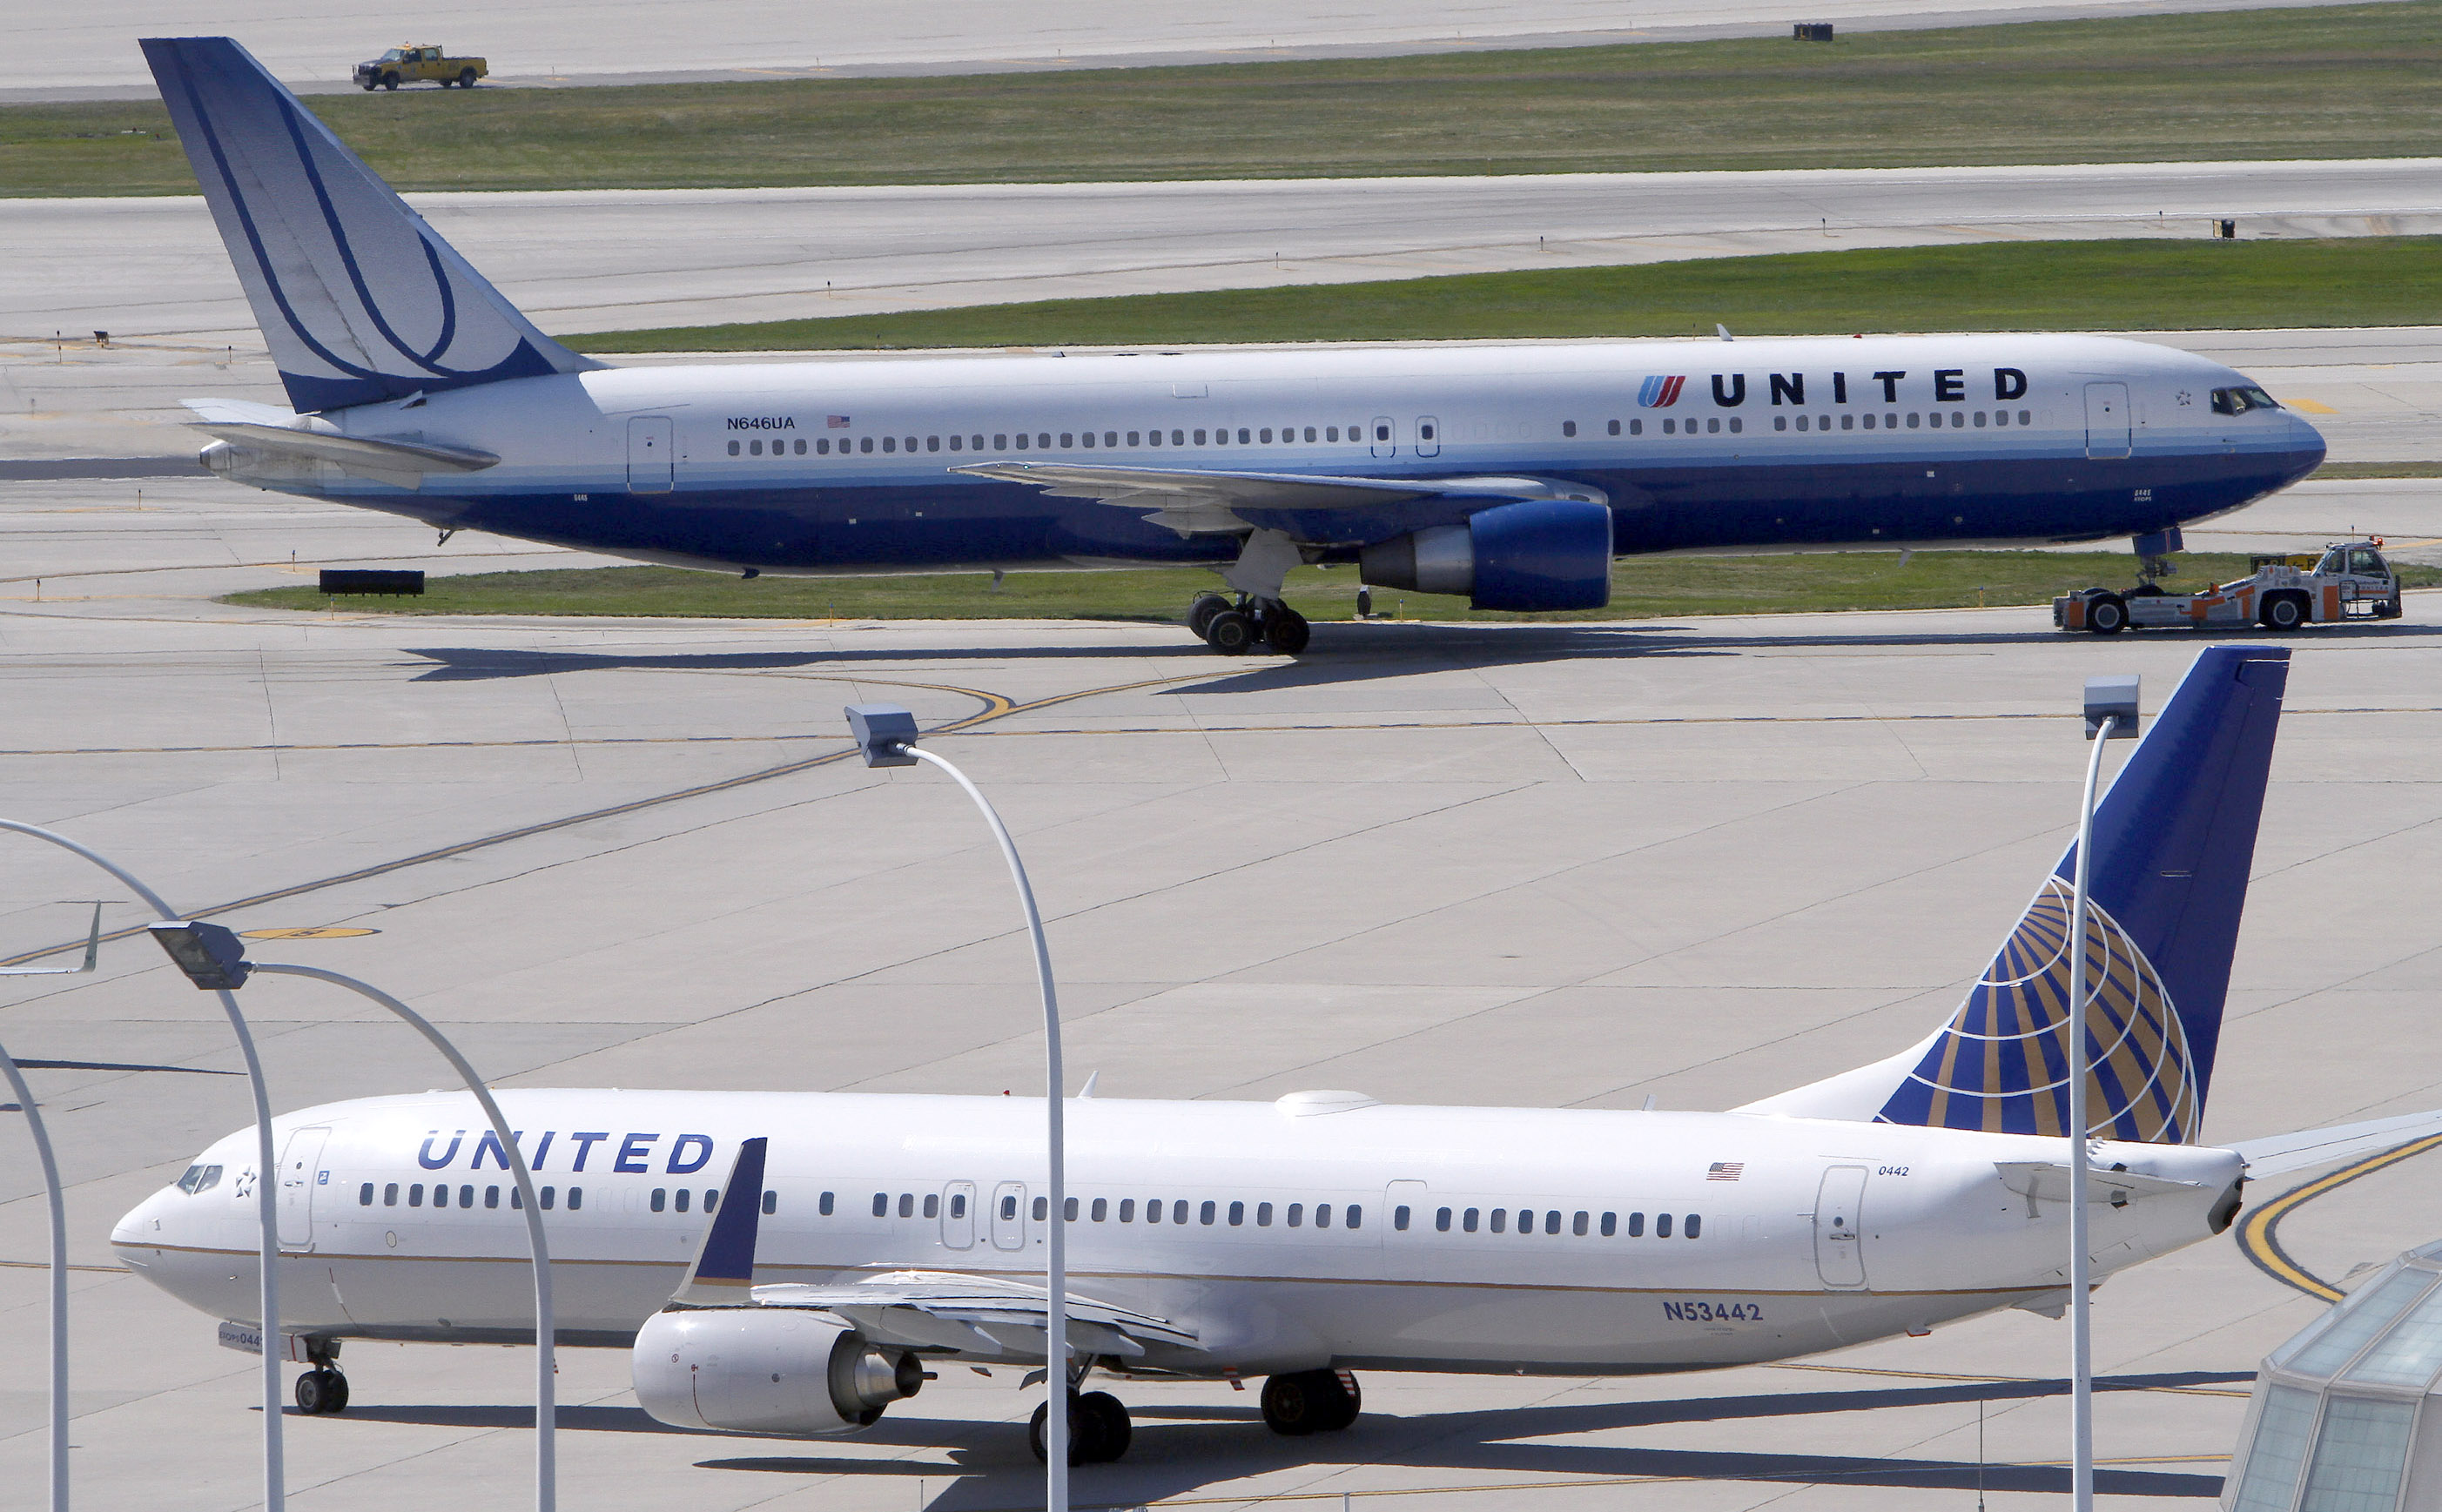 A United Airlines plane with the Continental Airlines logo on its tail, taxis to the runway while another United plane heads for the gate at O'Hare International airport in Chicago